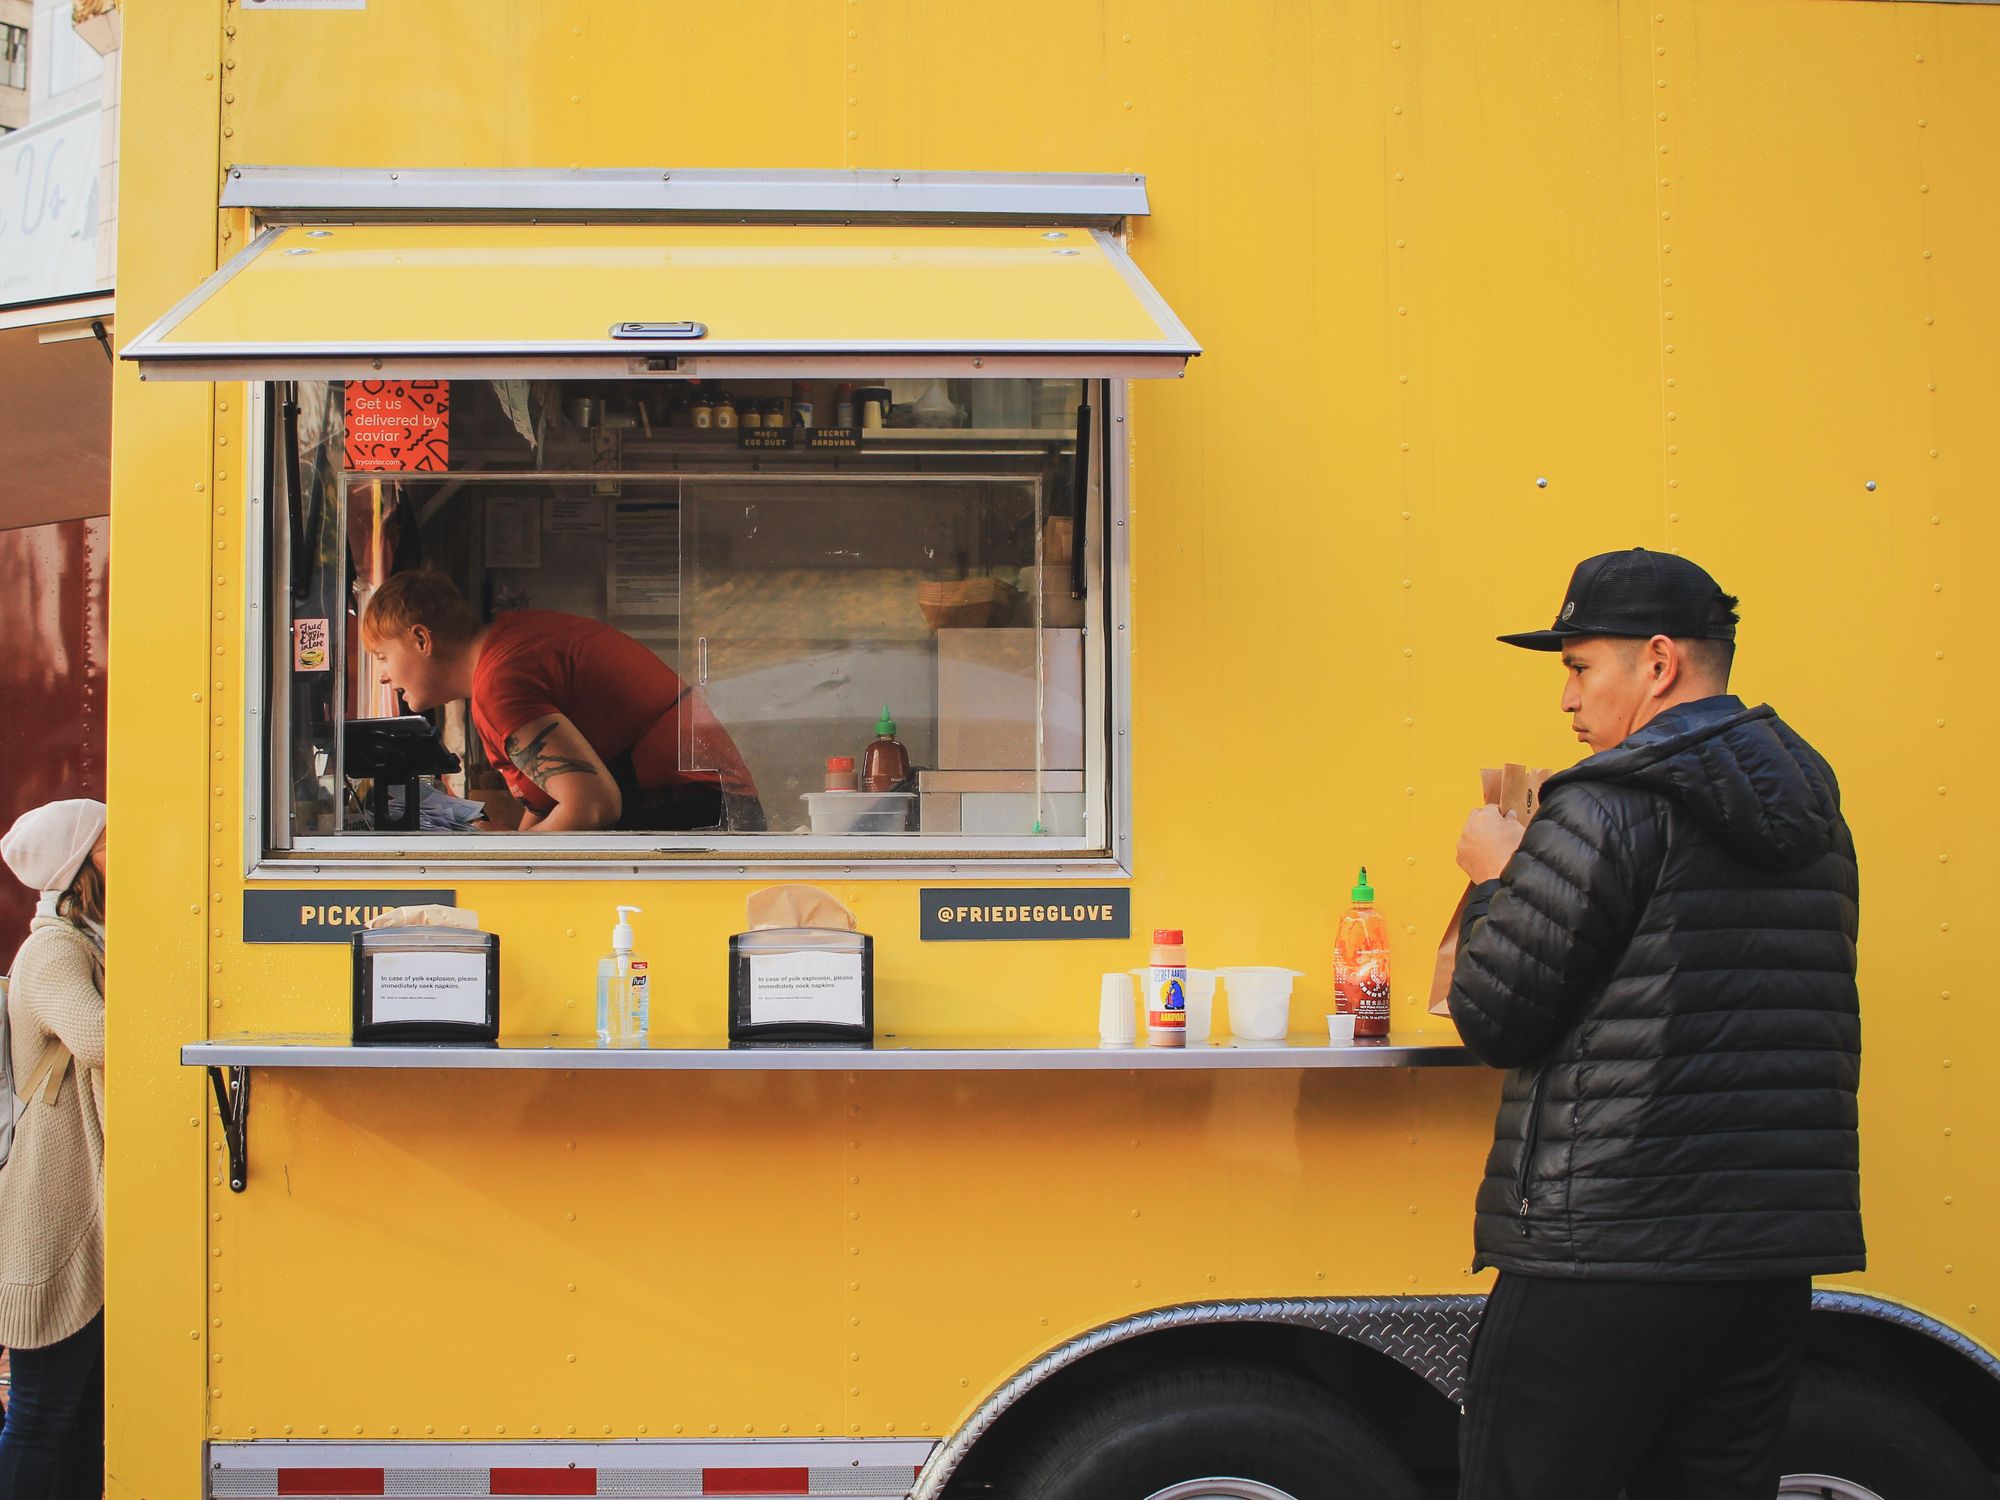 Weekly Tech Round Up: From Food Trucks to Startups